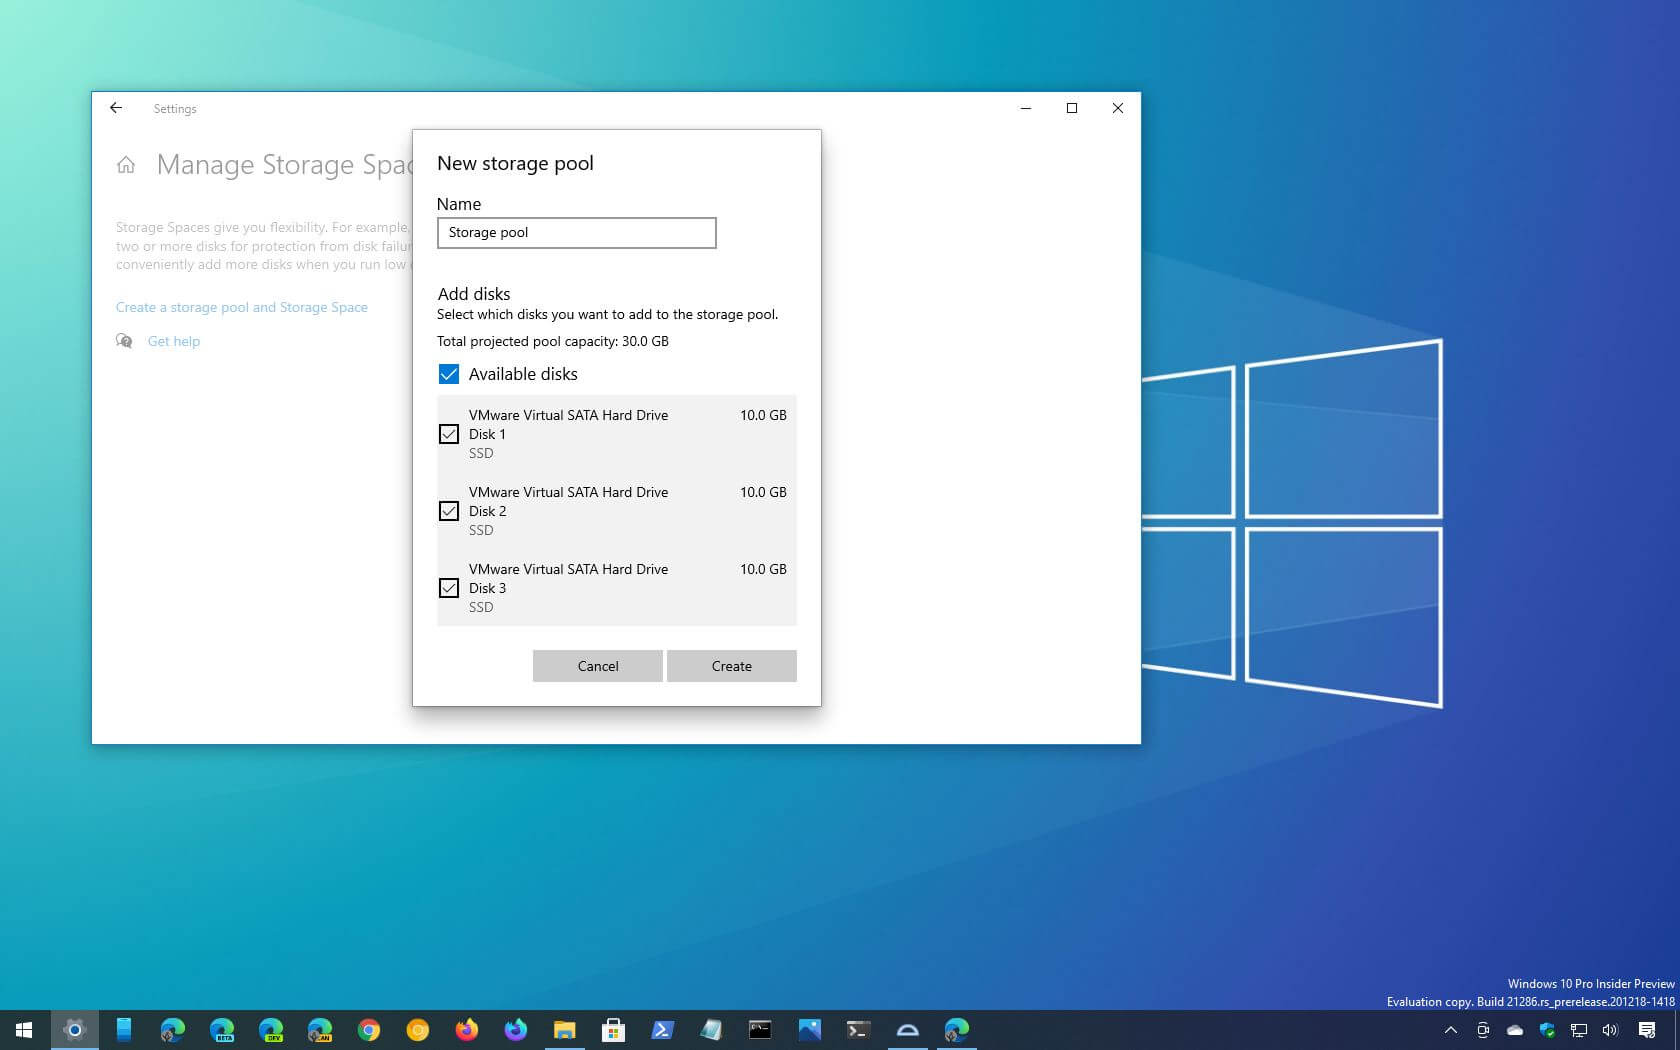 Windows 10 Settings app with Storage Spaces